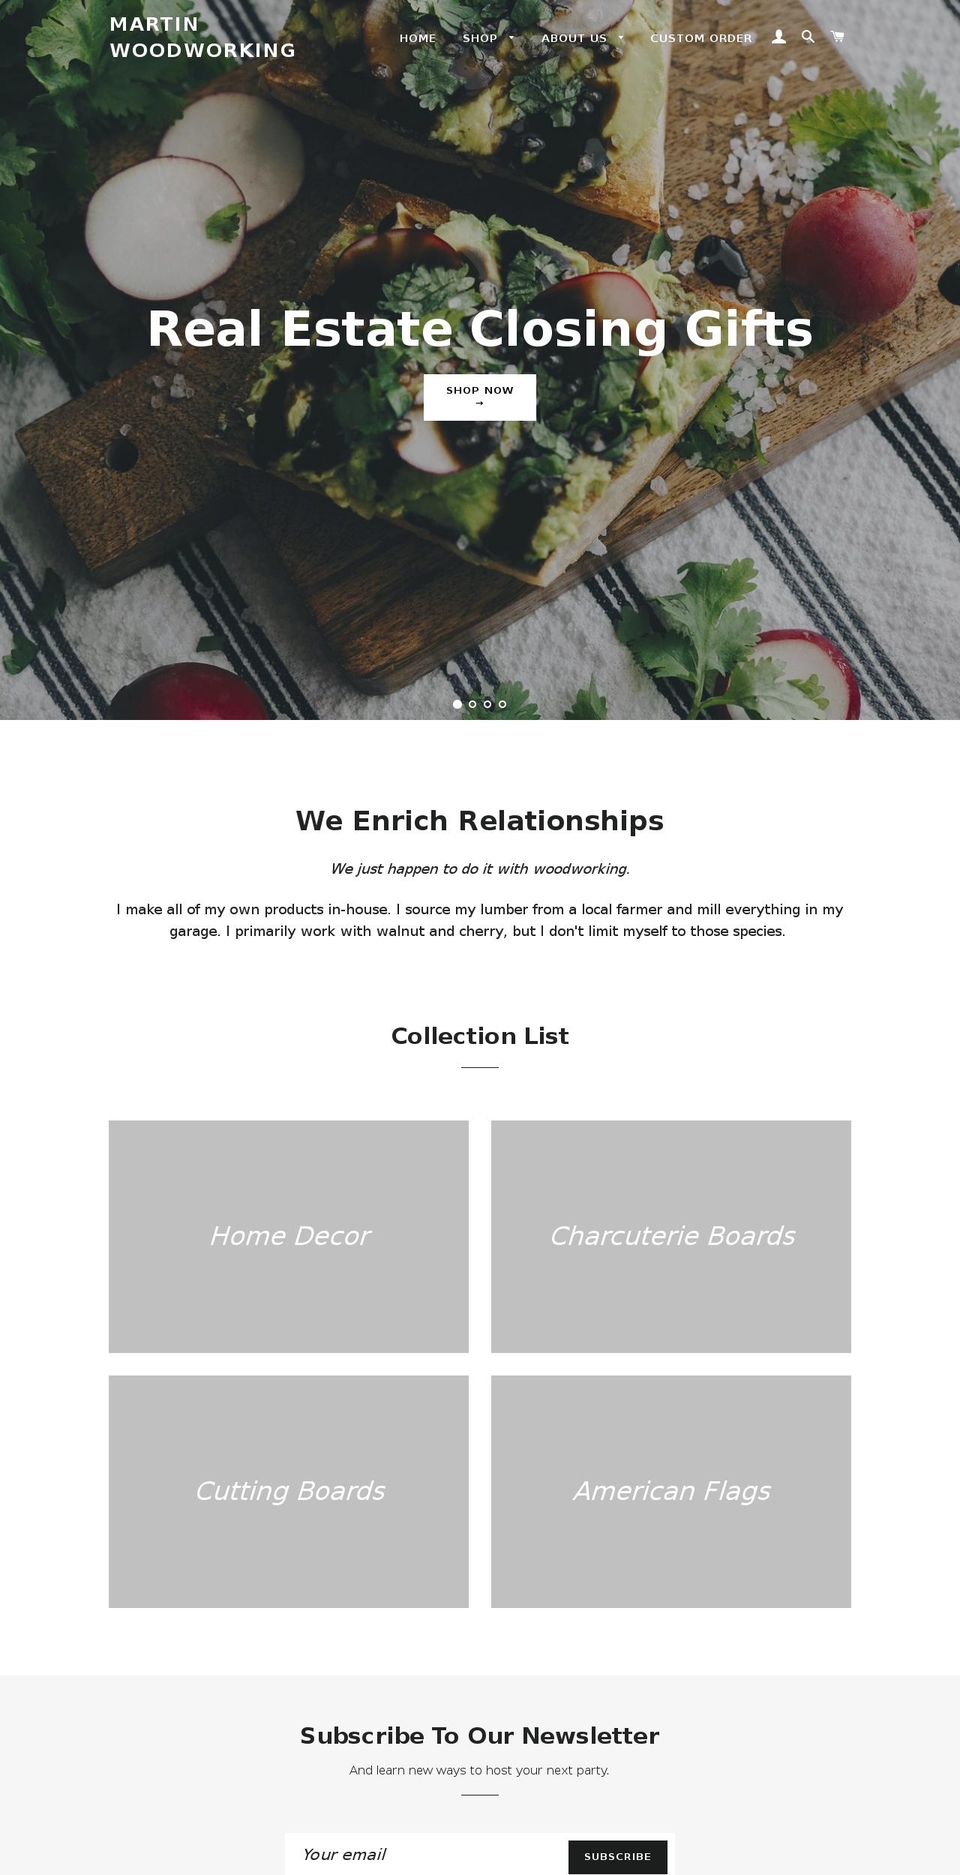 Wokiee Shopify theme site example martinwoodworking.com